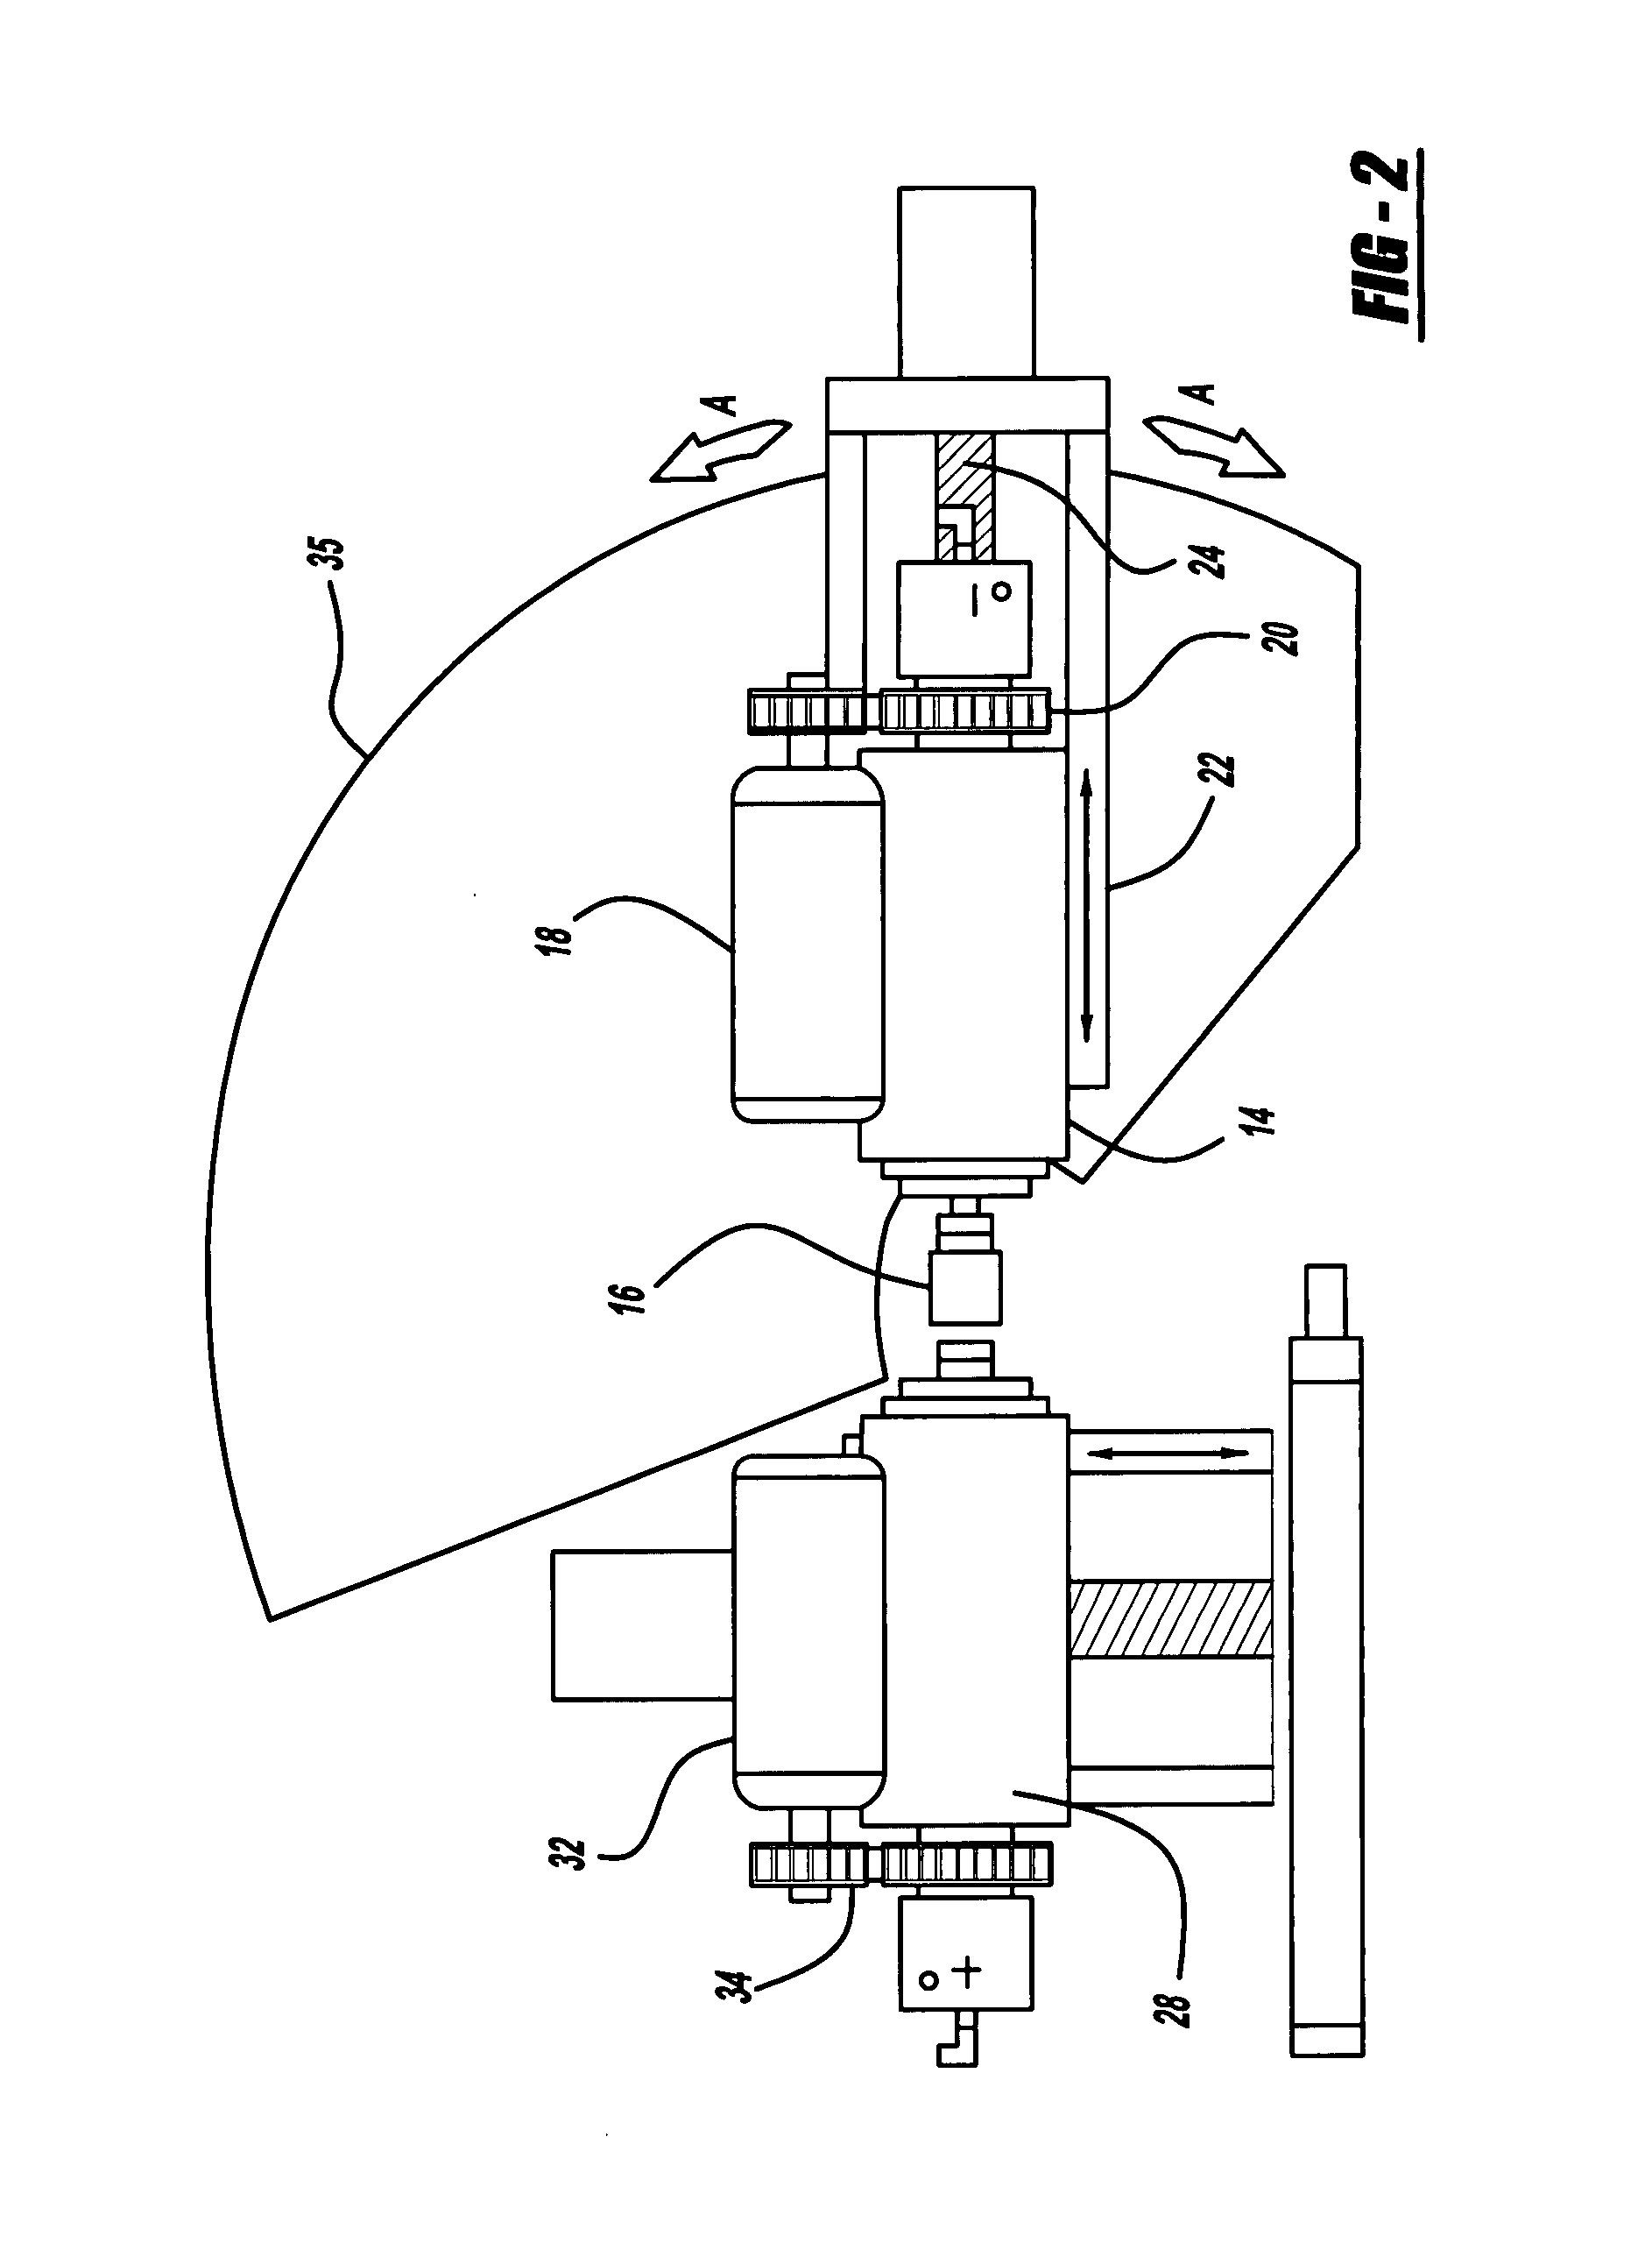 Method and apparatus for finishing a workpiece